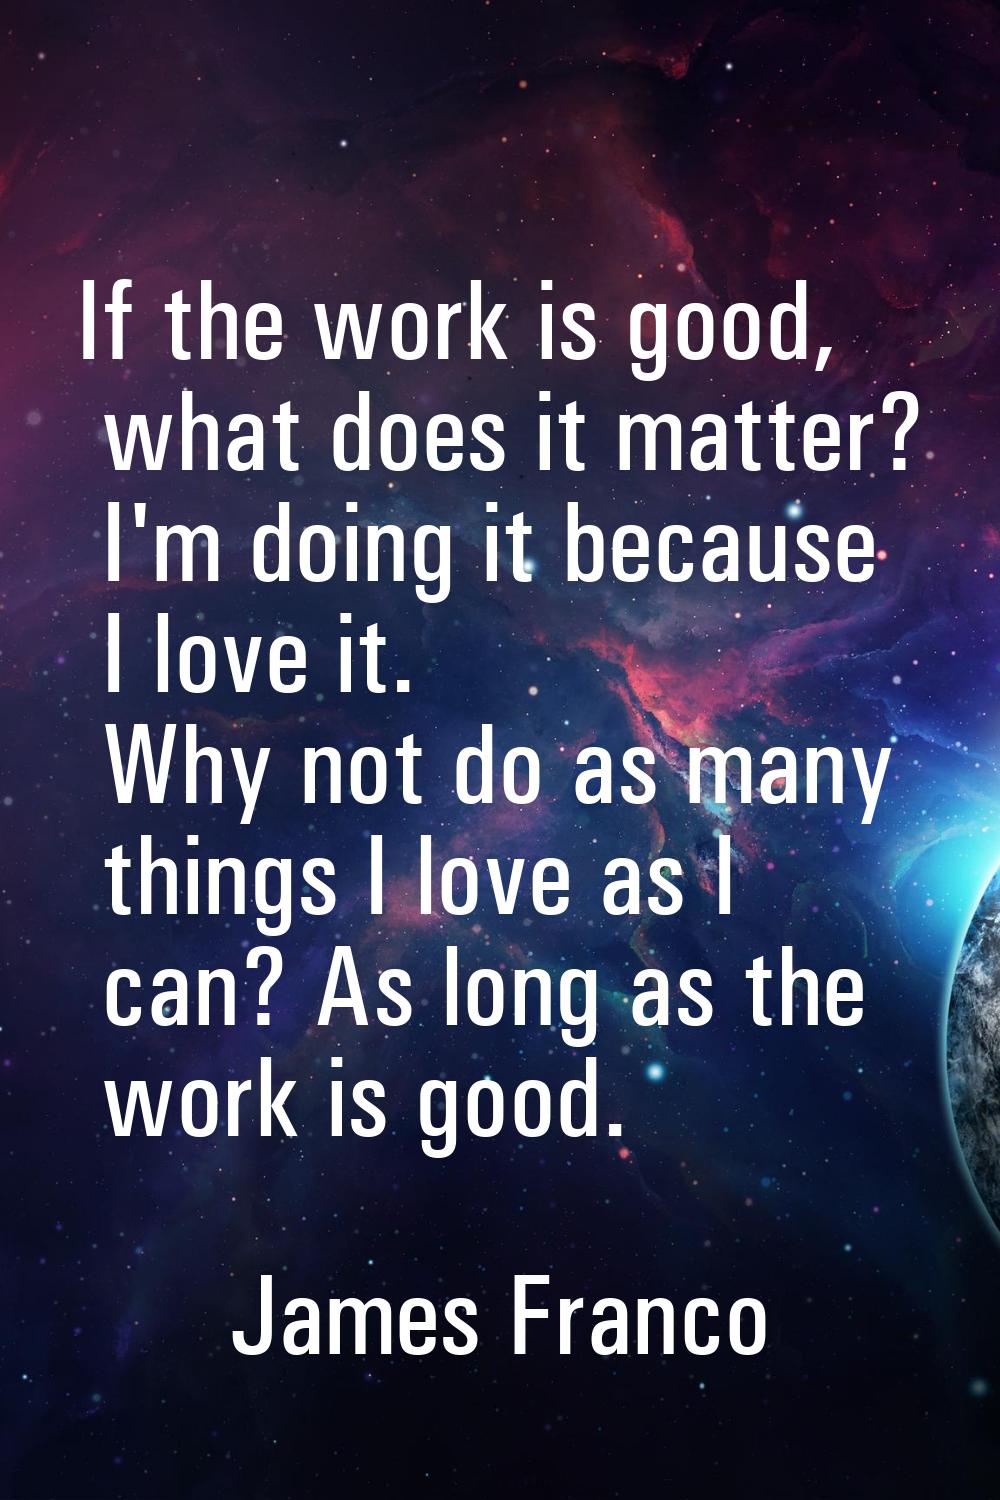 If the work is good, what does it matter? I'm doing it because I love it. Why not do as many things